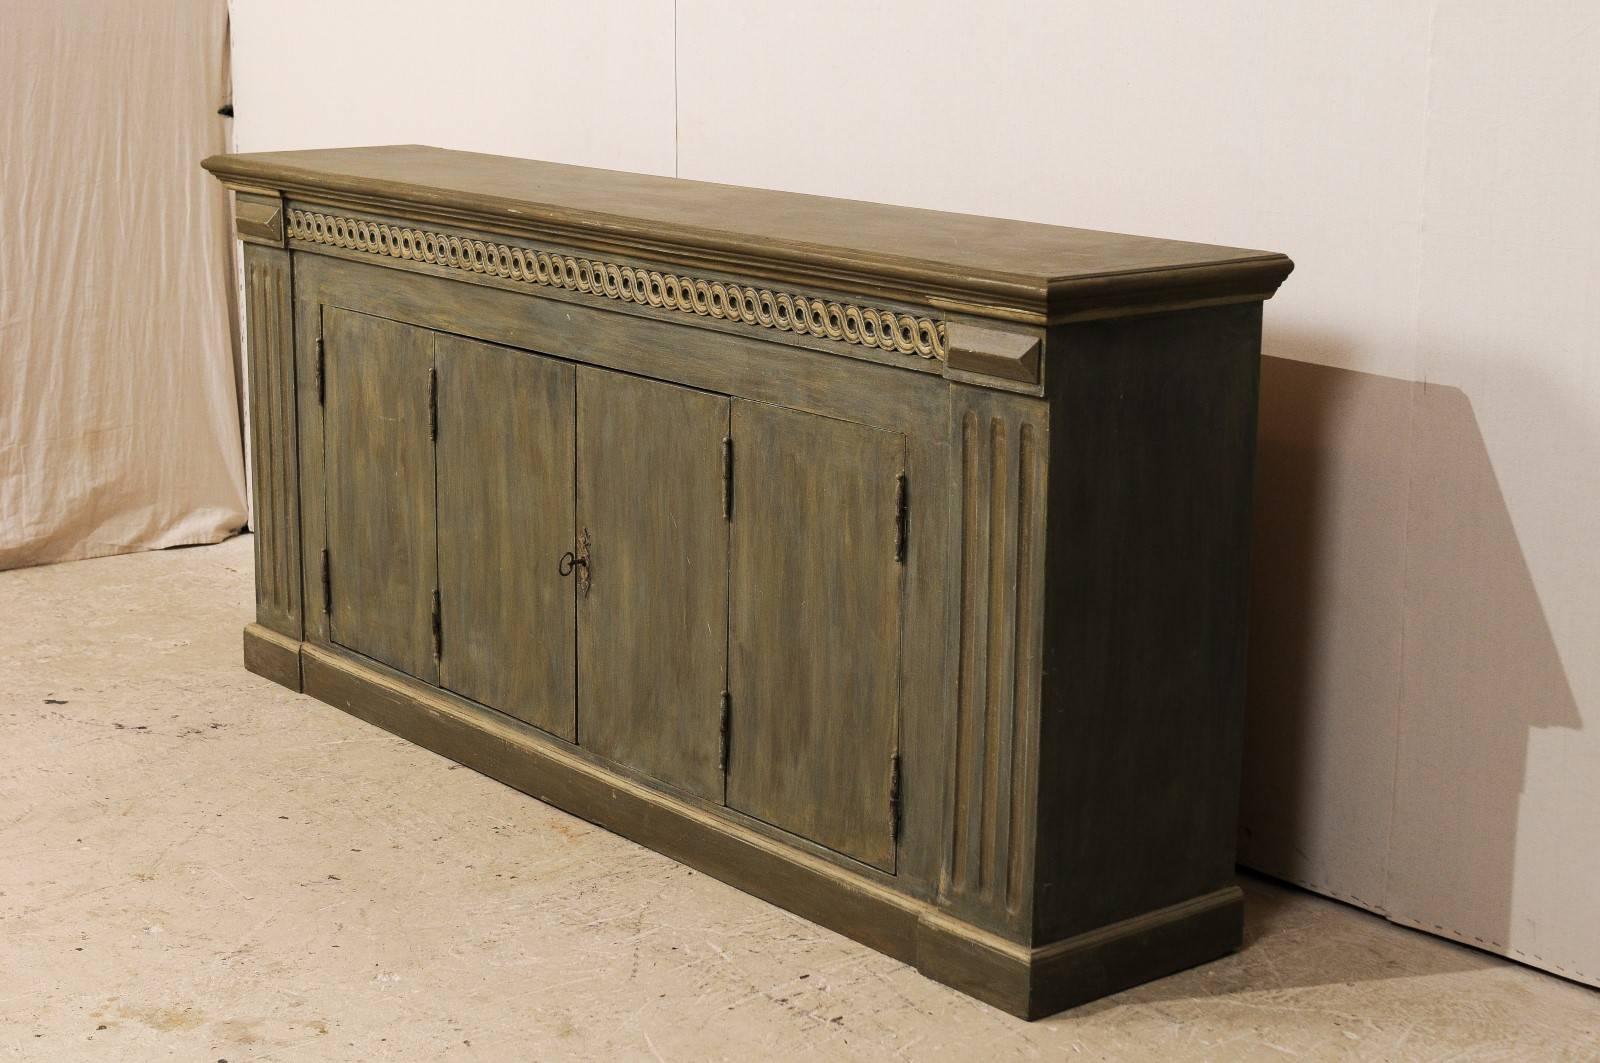 Brazilian Painted Wood Enfilade or Buffet Cabinet, Guilloche Molding, Grey-Green 1